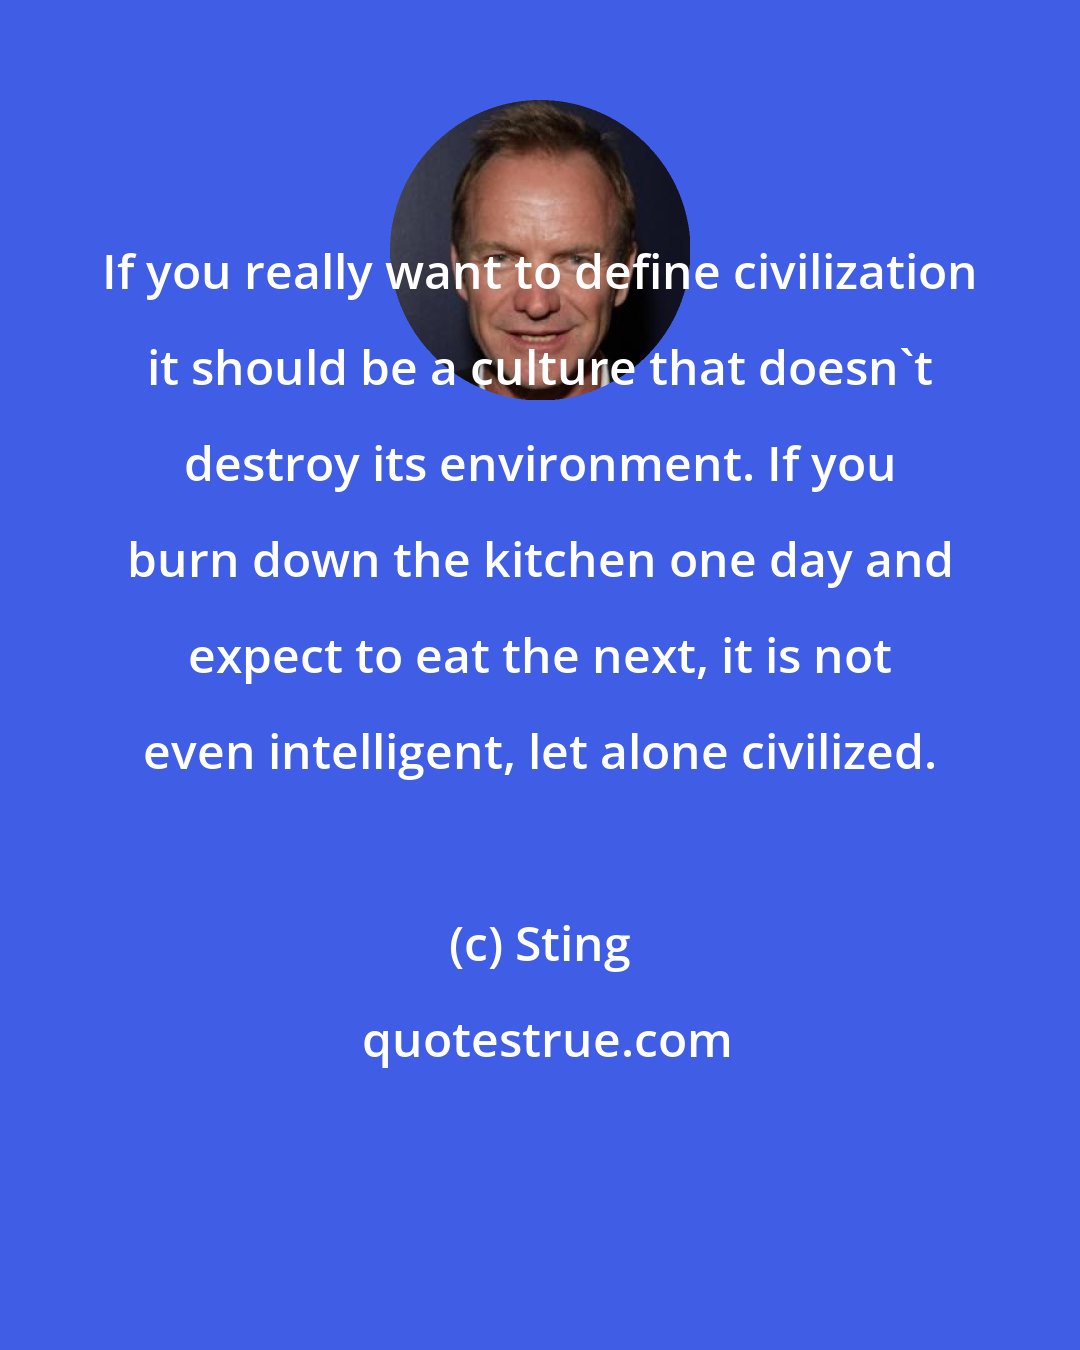 Sting: If you really want to define civilization it should be a culture that doesn't destroy its environment. If you burn down the kitchen one day and expect to eat the next, it is not even intelligent, let alone civilized.